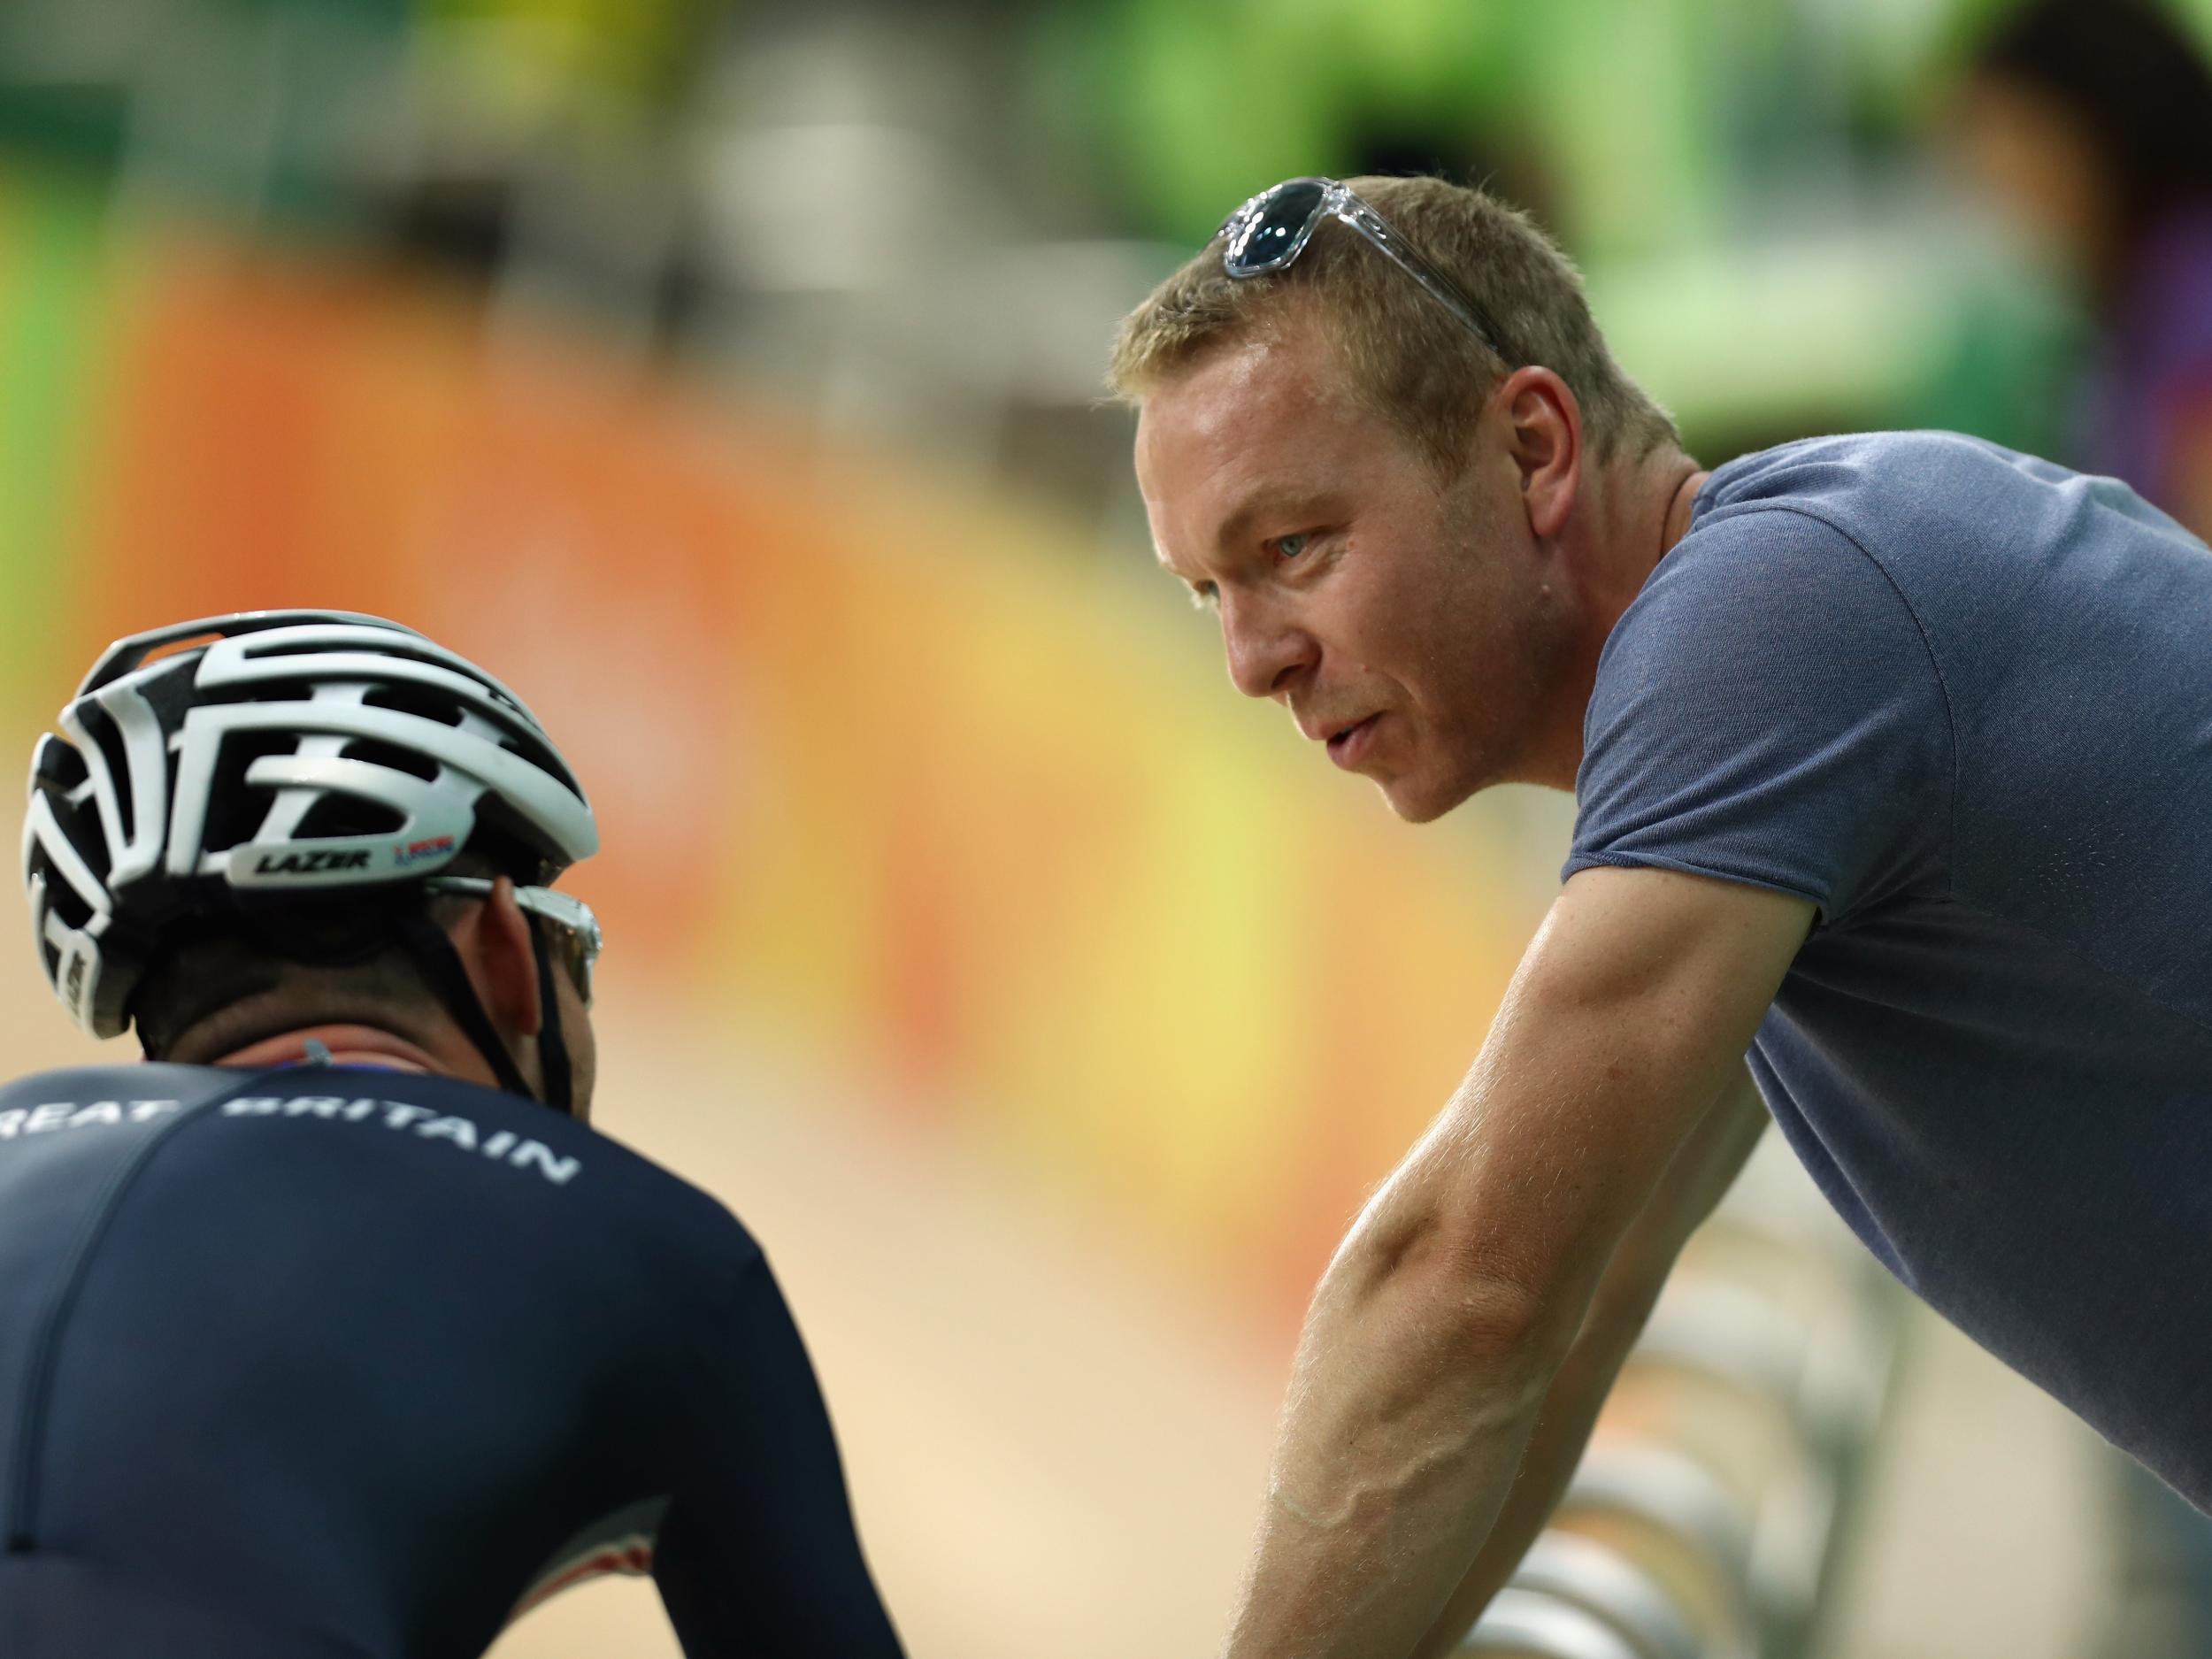 Hoy was part of the Great Britain cycling squad from 1995 to 2013